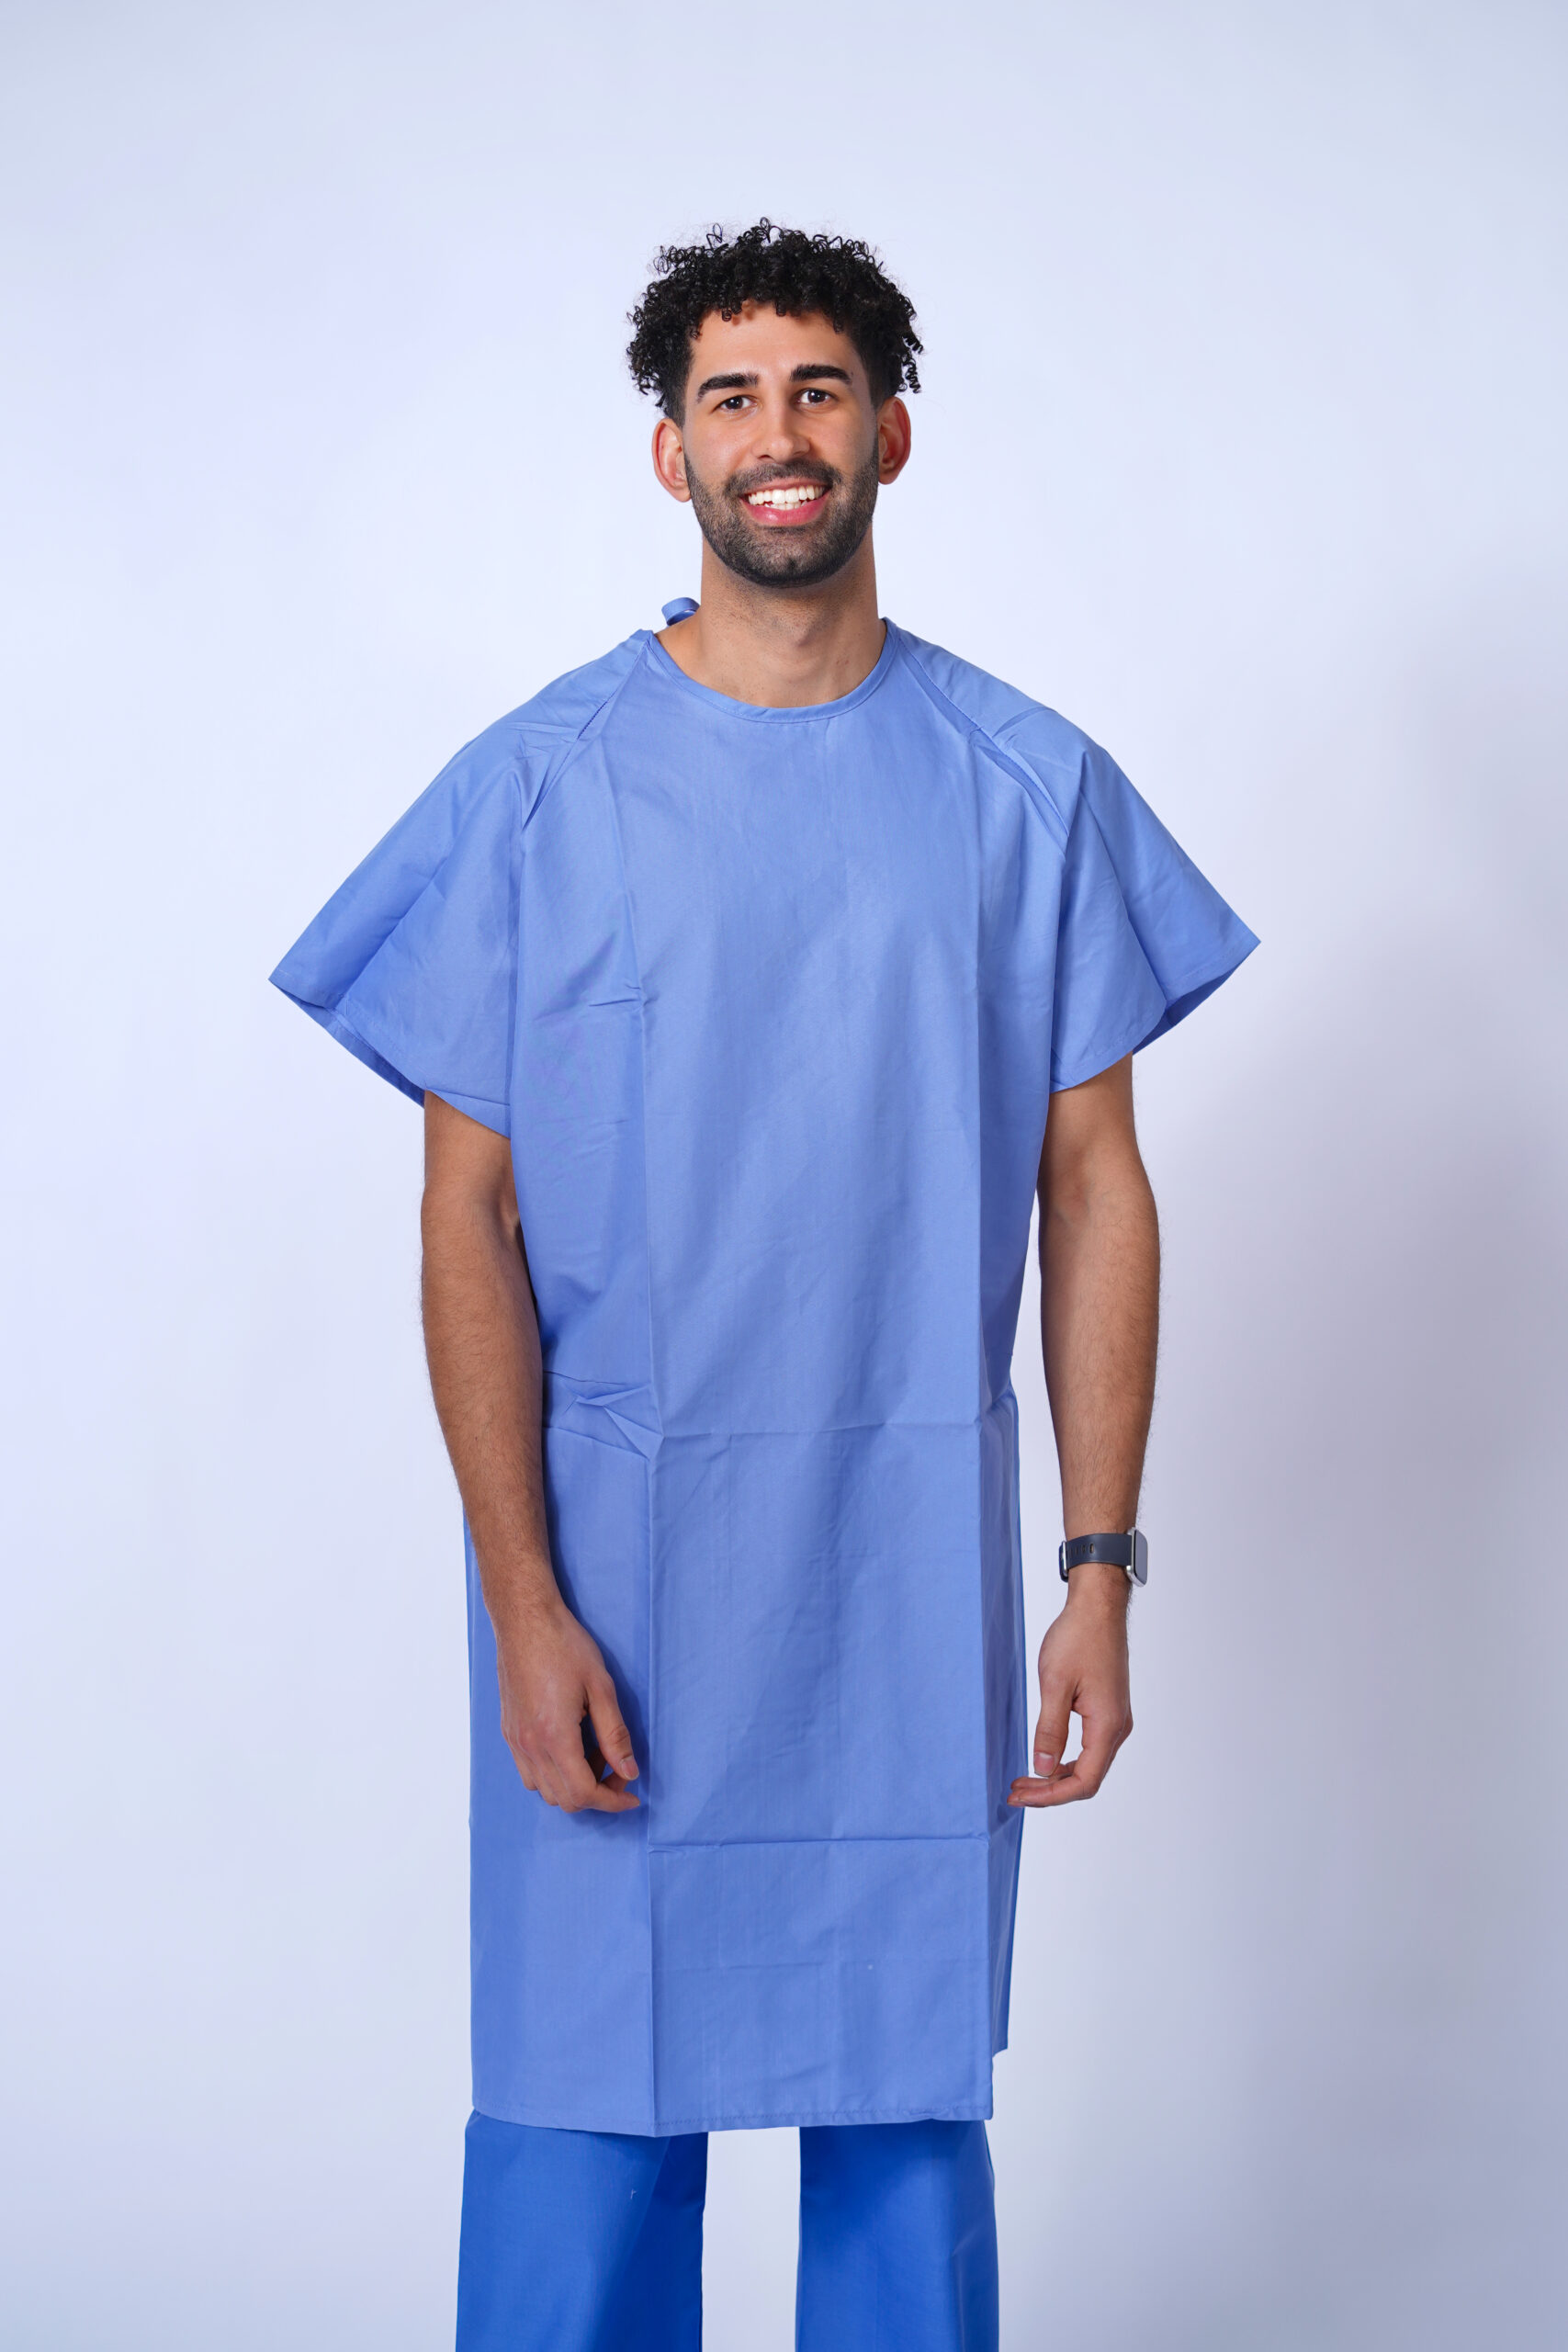 Say Goodbye to Unflattering Gowns: Browse Hospital Gowns for Sale - DocCheck